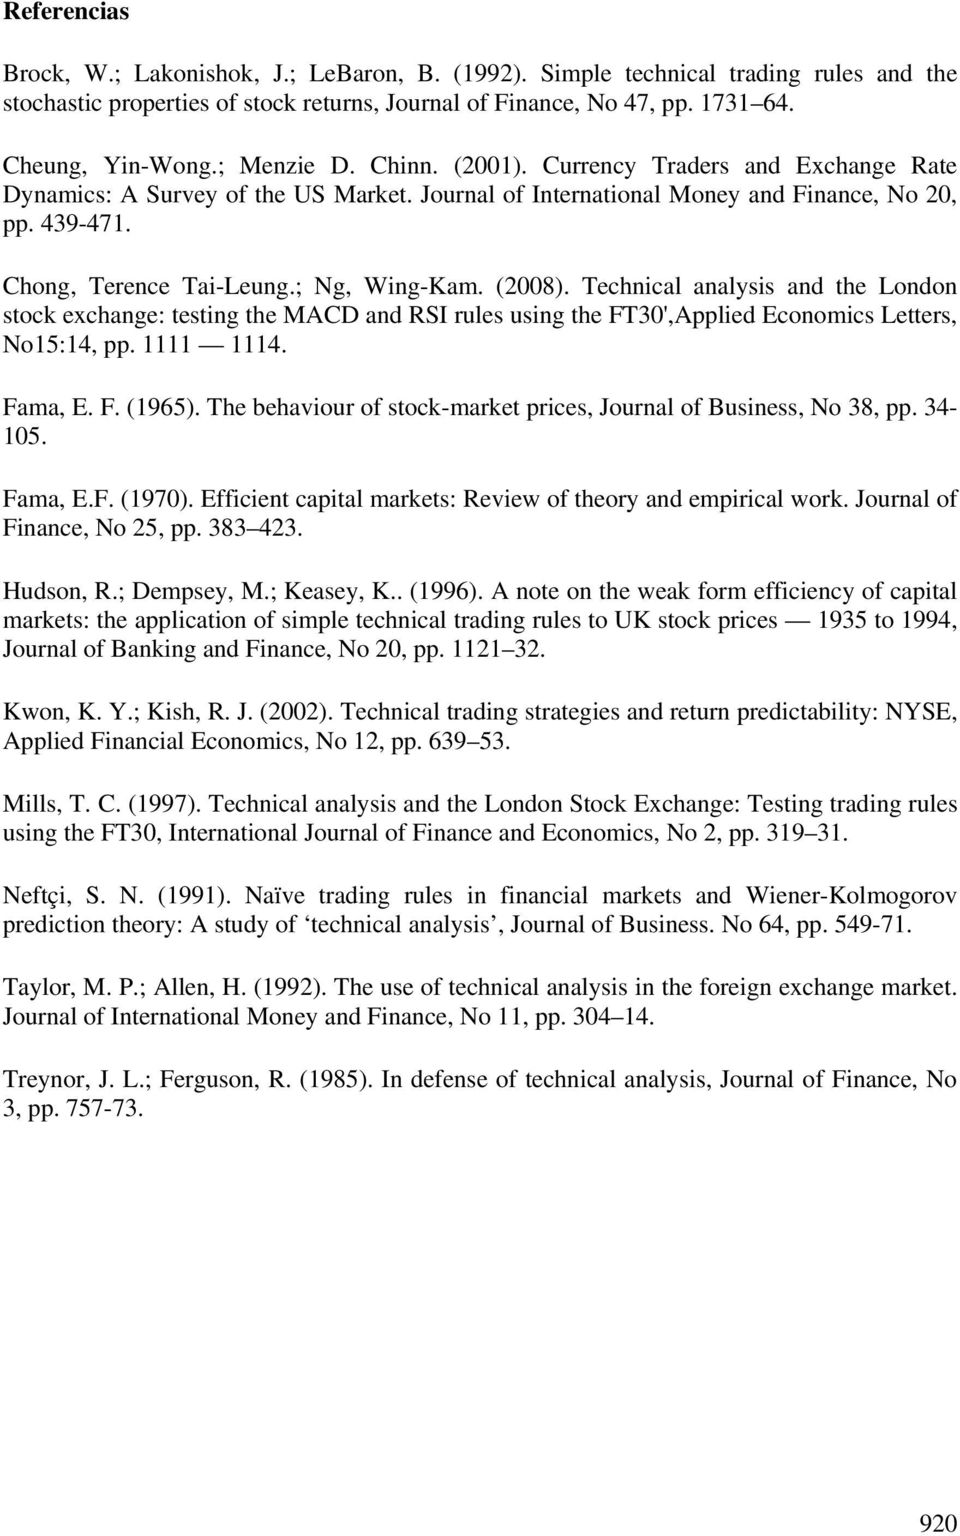 ; Ng, Wing-Kam. (2008). Technical analysis and the London stock exchange: testing the MACD and RSI rules using the FT30',Applied Economics Letters, No15:14, pp. 1111 1114. Fama, E. F. (1965).